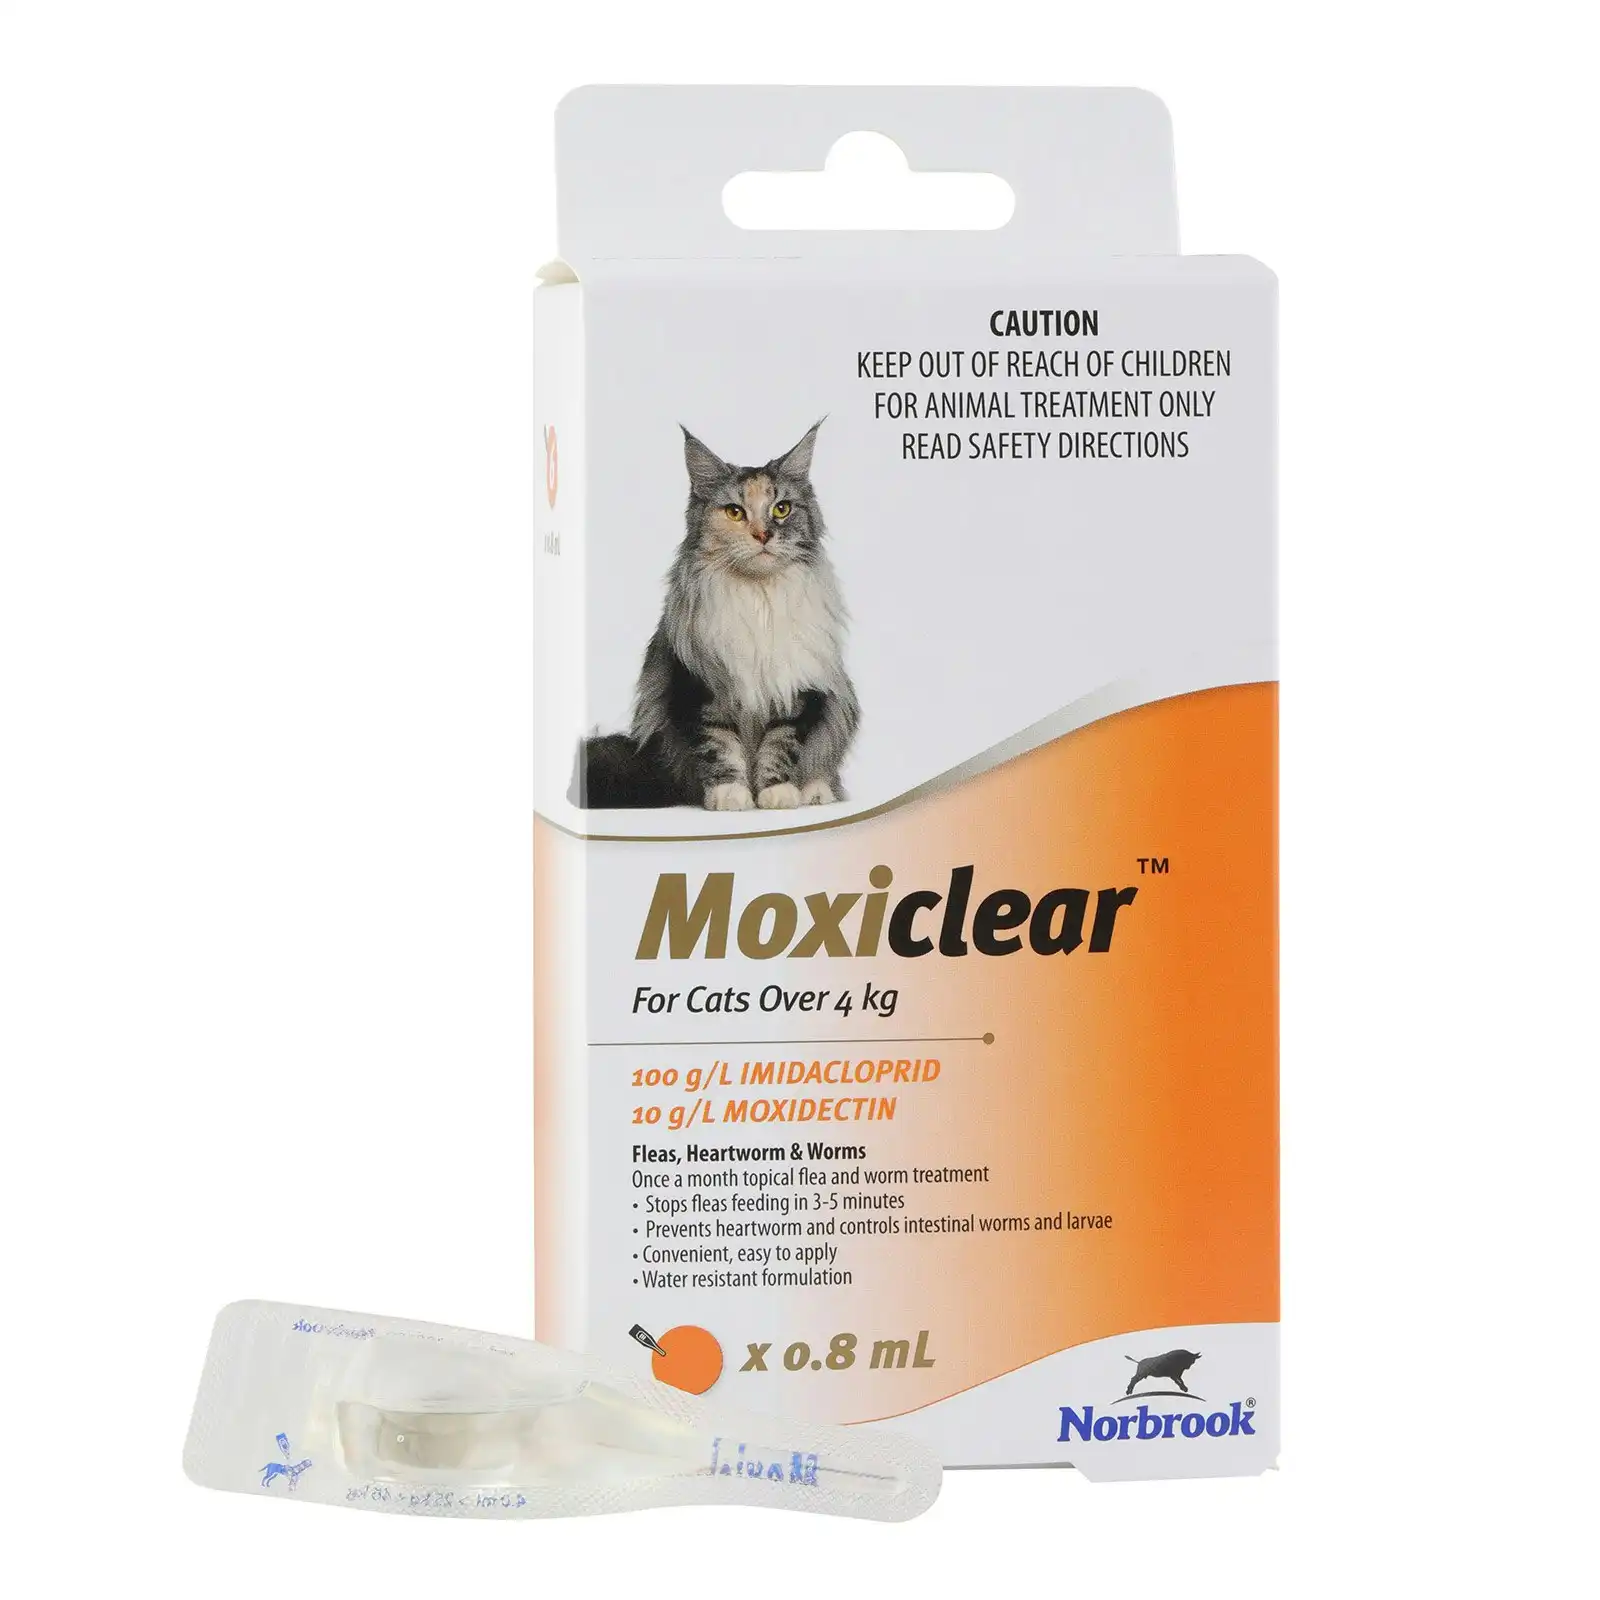 Moxiclear for Large Cats Over 4 Kg (ORANGE) 3 Pipettes